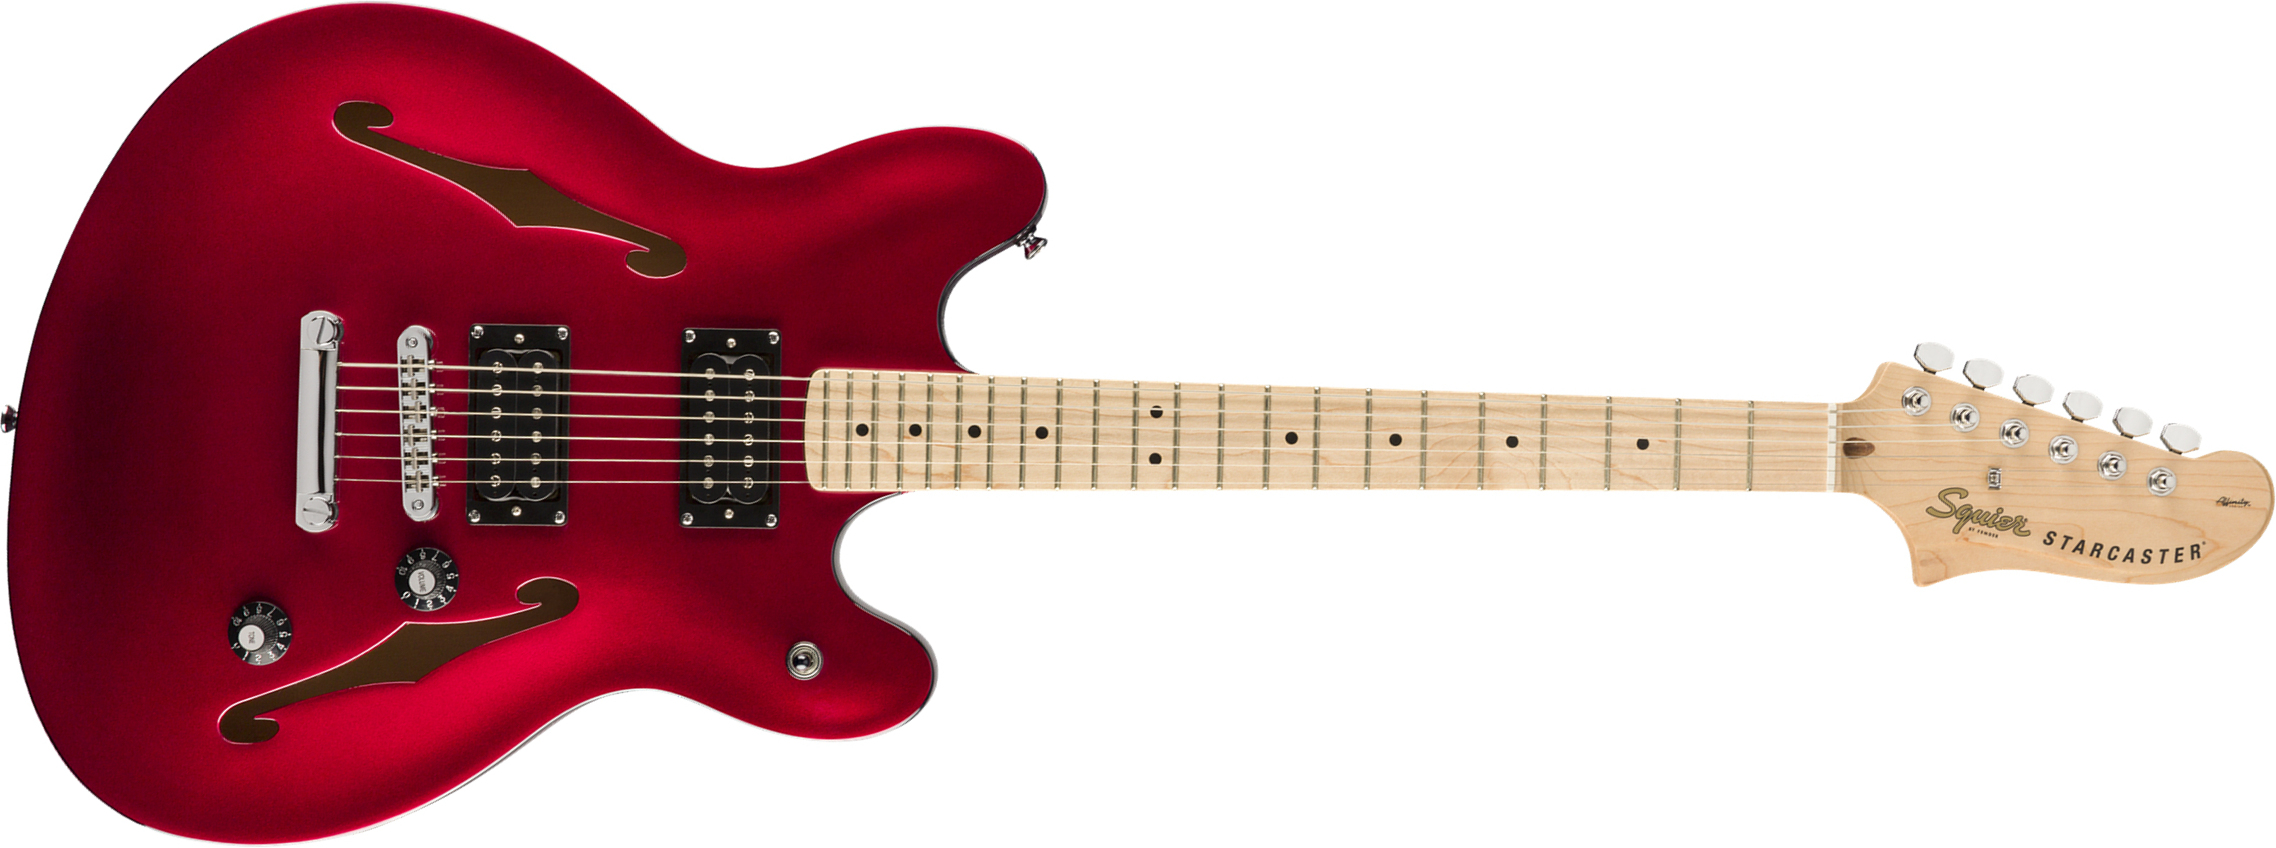 Squier Starcaster Affinity 2019 Hh Ht Mn - Candy Apple Red - Semi-hollow electric guitar - Main picture